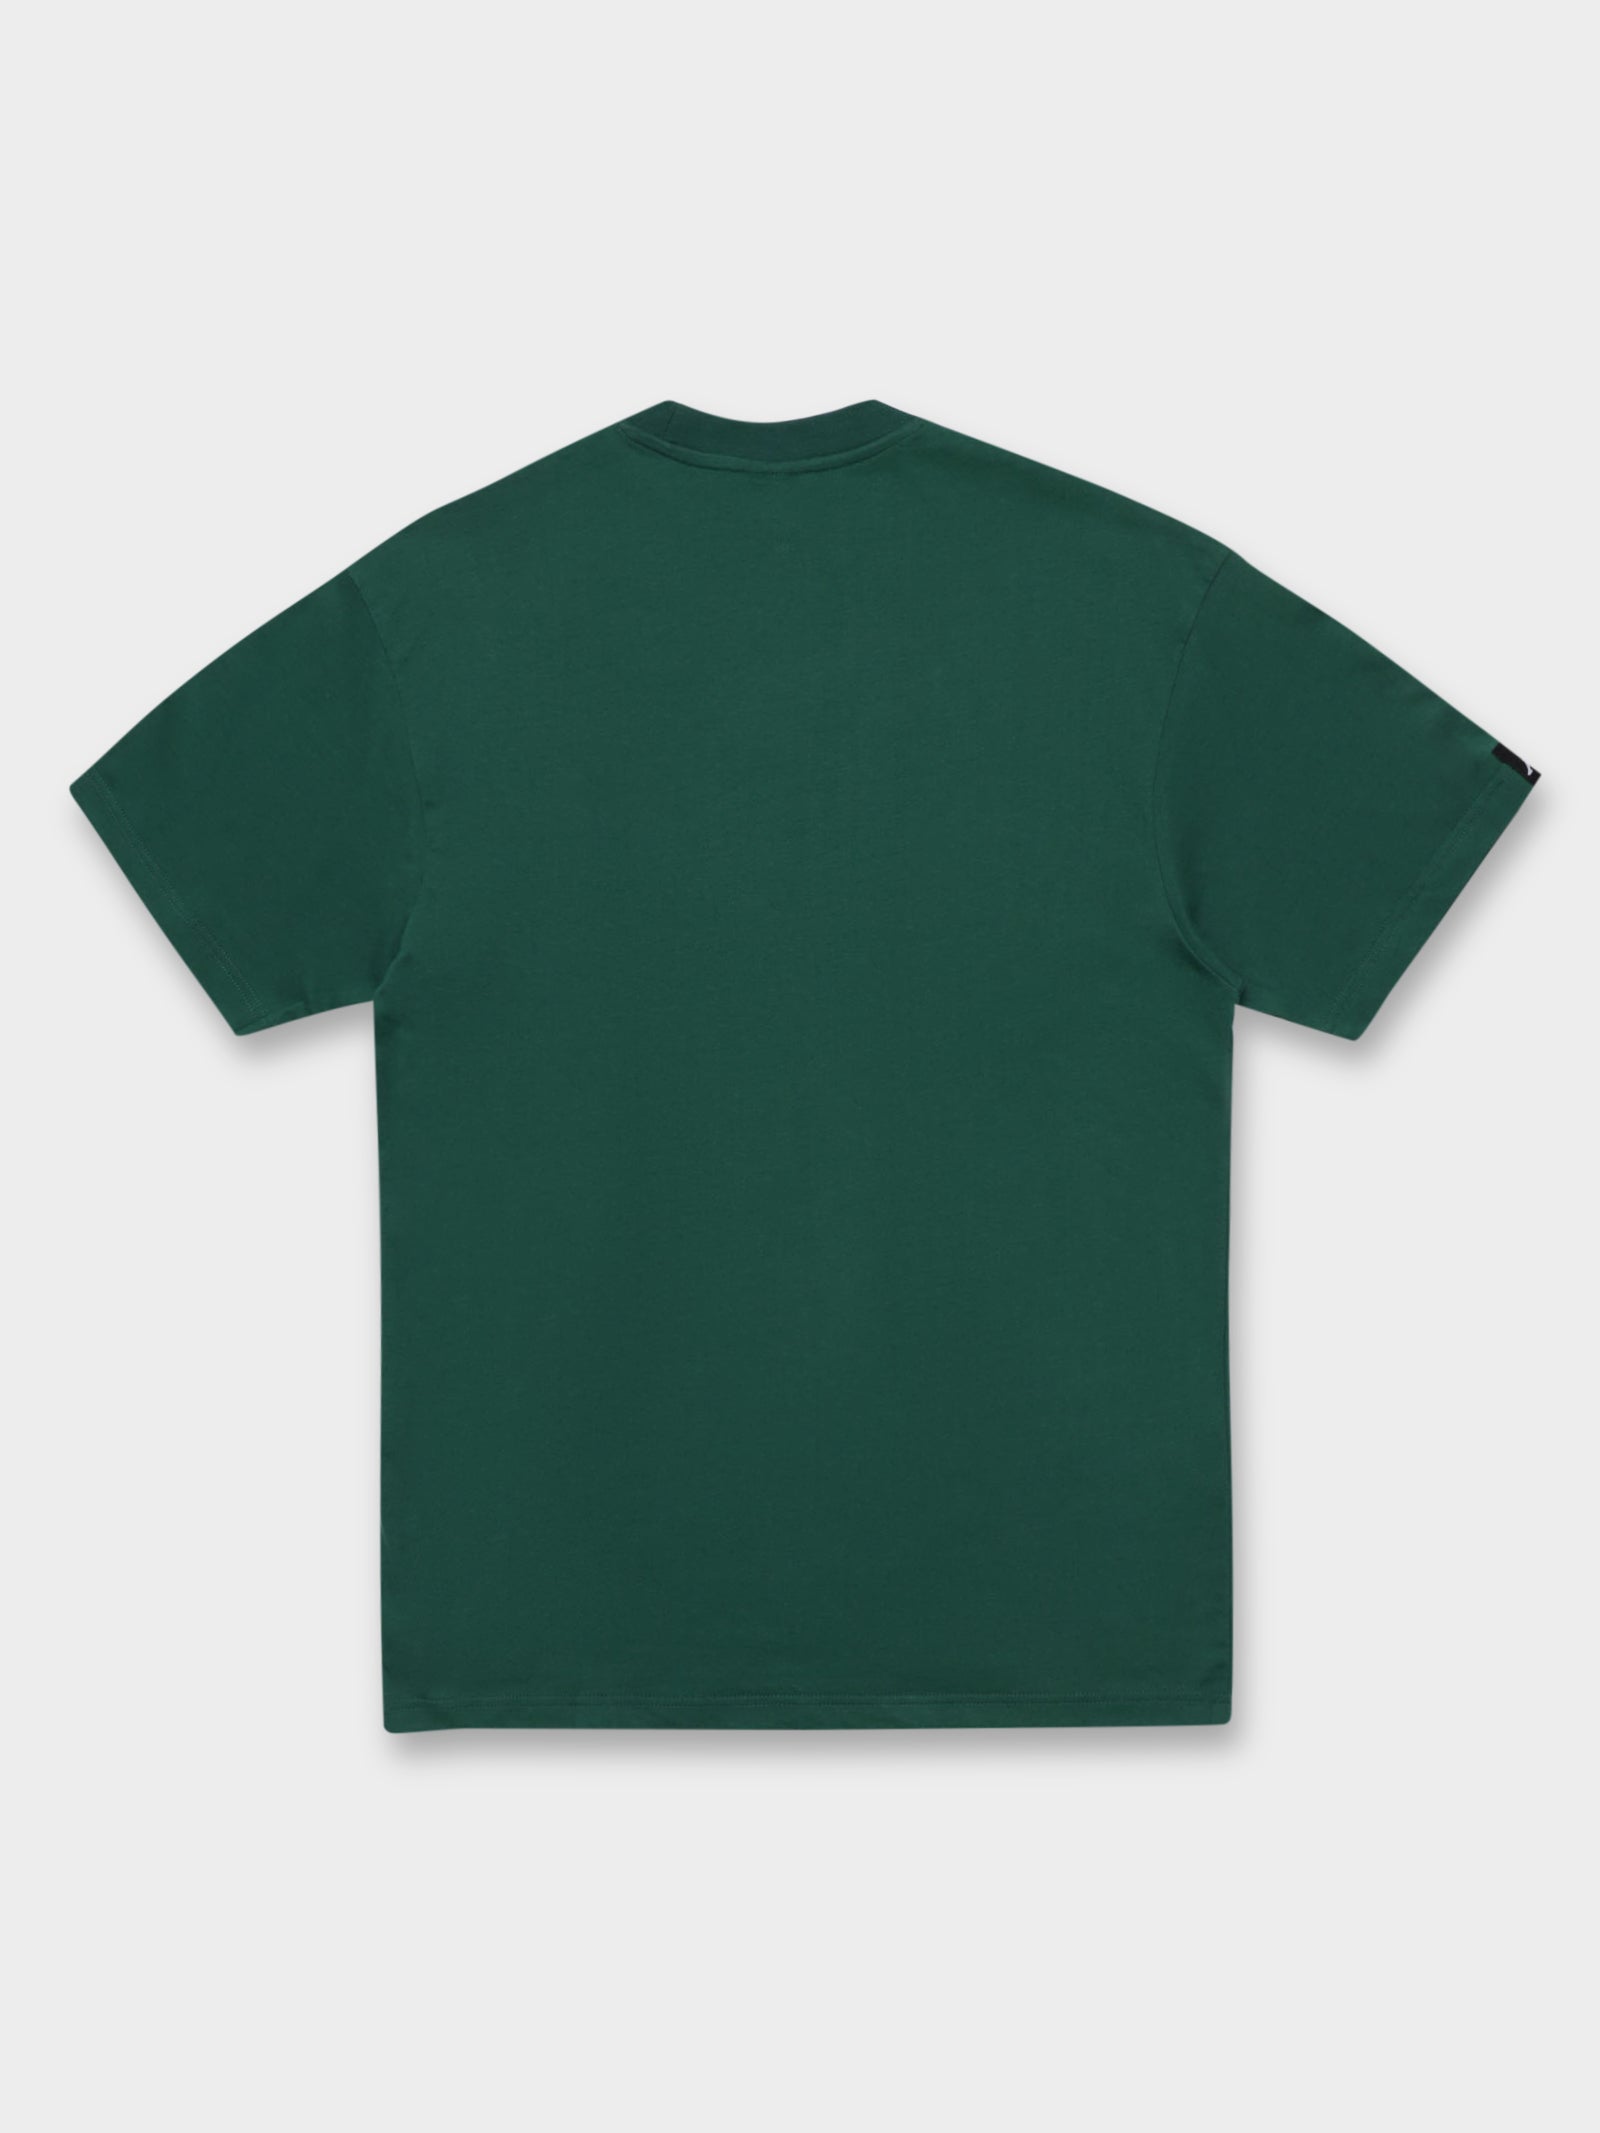 Authentic Senoc T-Shirt in Green Posy - Glue Store